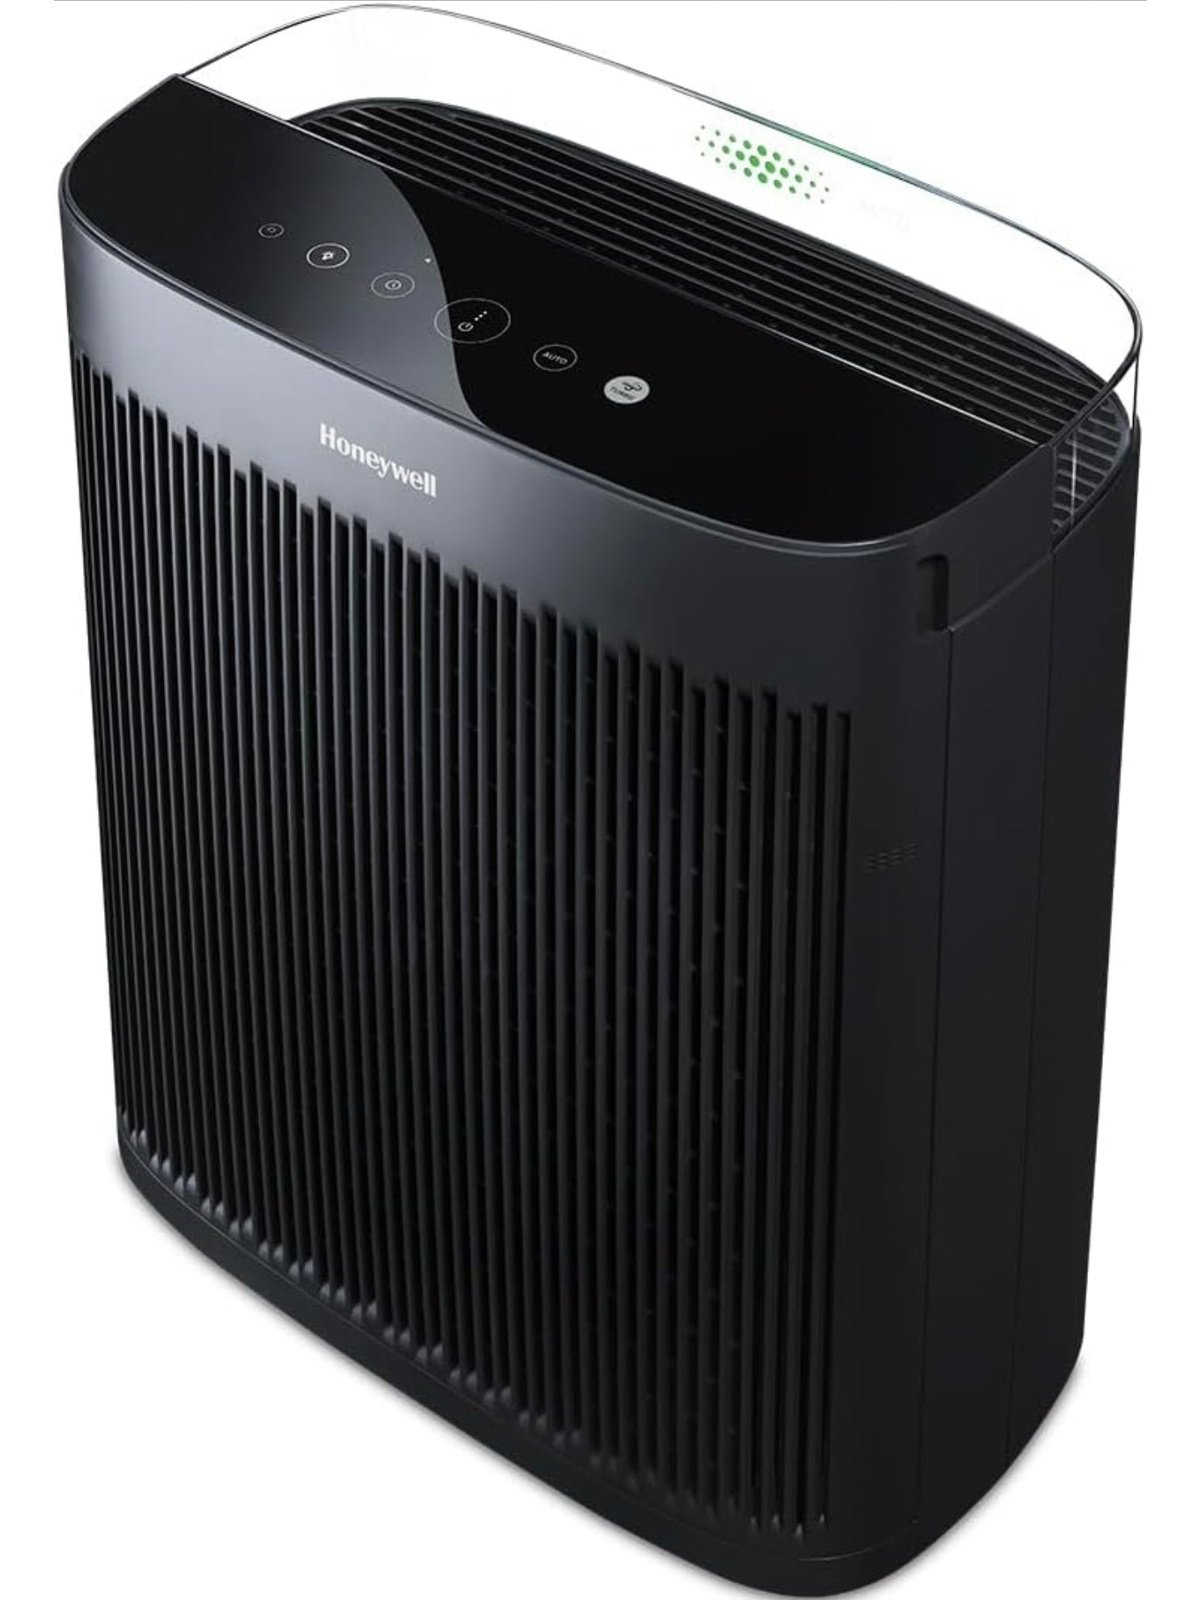 Honeywell InSight HEPA Air Purifier with Air Quality Indicator and Auto Mode, Extra-Large Rooms, Bedrooms, Home (500 sq ft), Black - Reduces Airborne Allergens, Smoke, Dust, Pollen, HPA5300B